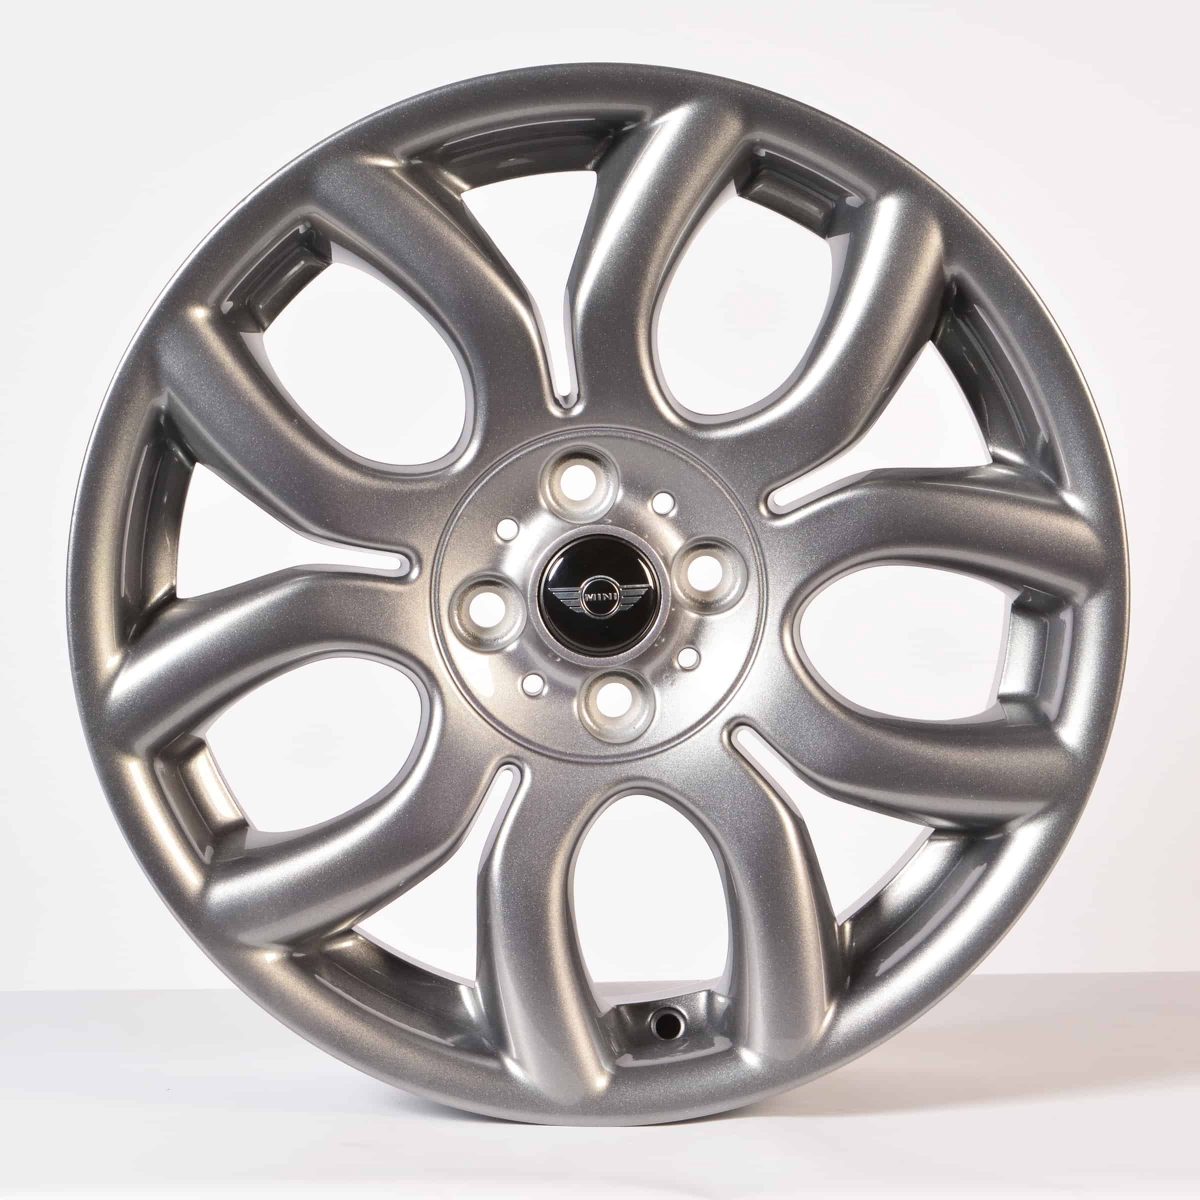 Genuine Mini Cooper S R50 R53 R56 R97 Flame Spoke 17" inch Alloy Wheels with Anthracite Grey Finish 36116775685